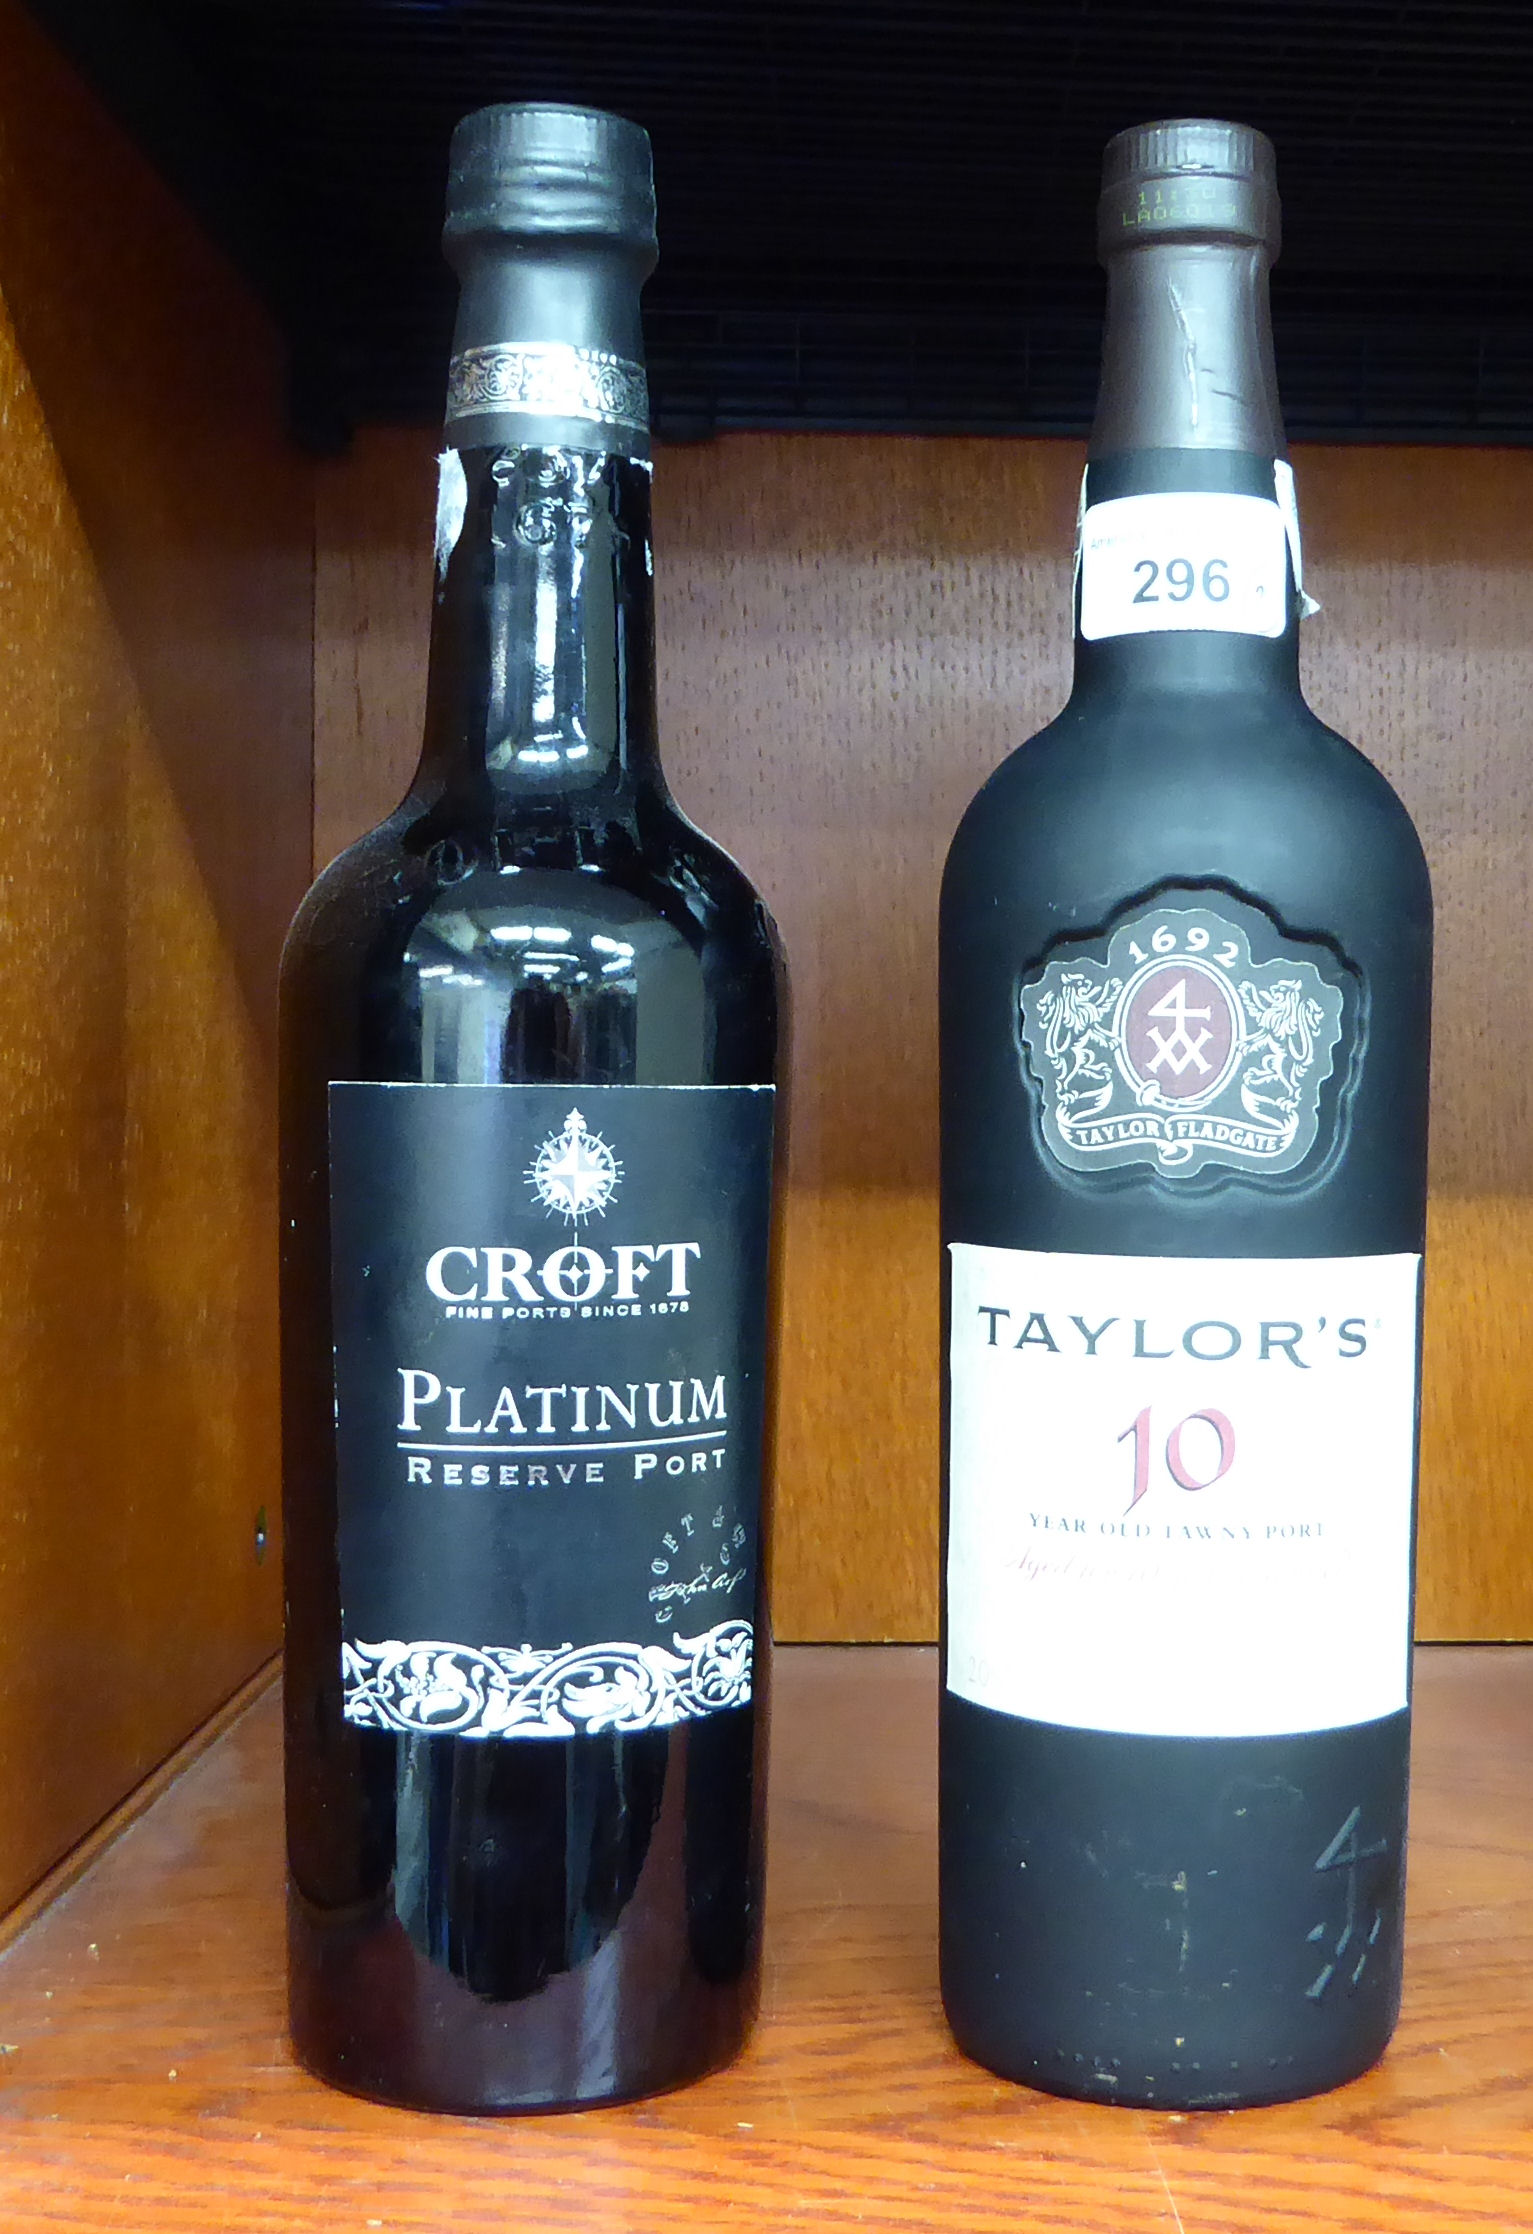 A bottle of Taylor's 10 year old Tawny Port; and a bottle of Croft Platinum Reserve Port